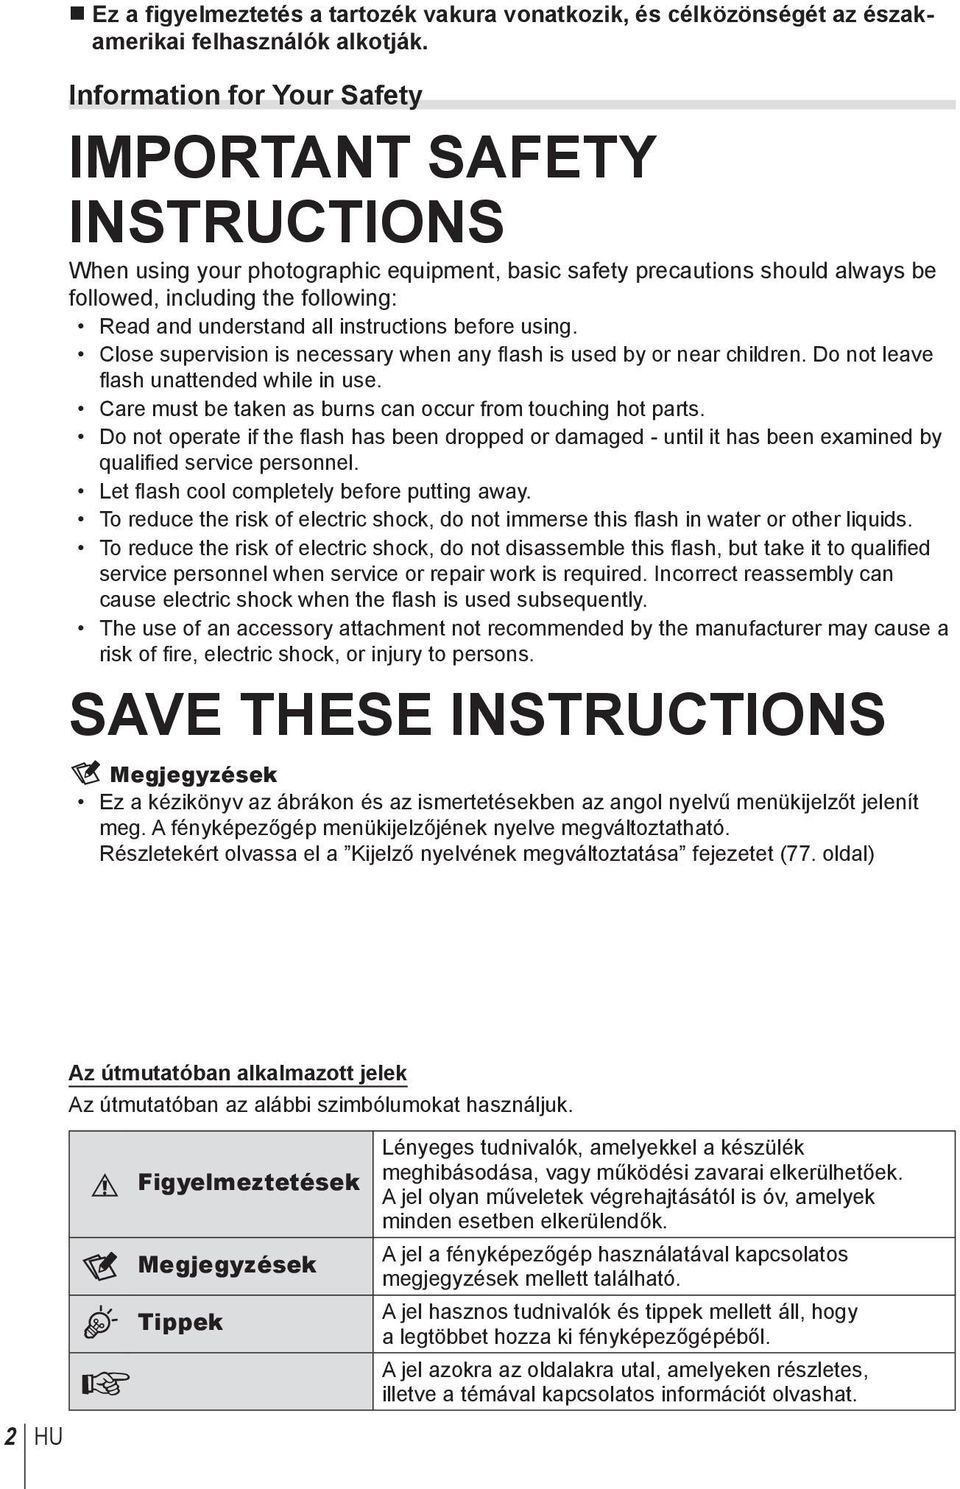 instructions before using. Close supervision is necessary when any fl ash is used by or near children. Do not leave fl ash unattended while in use.